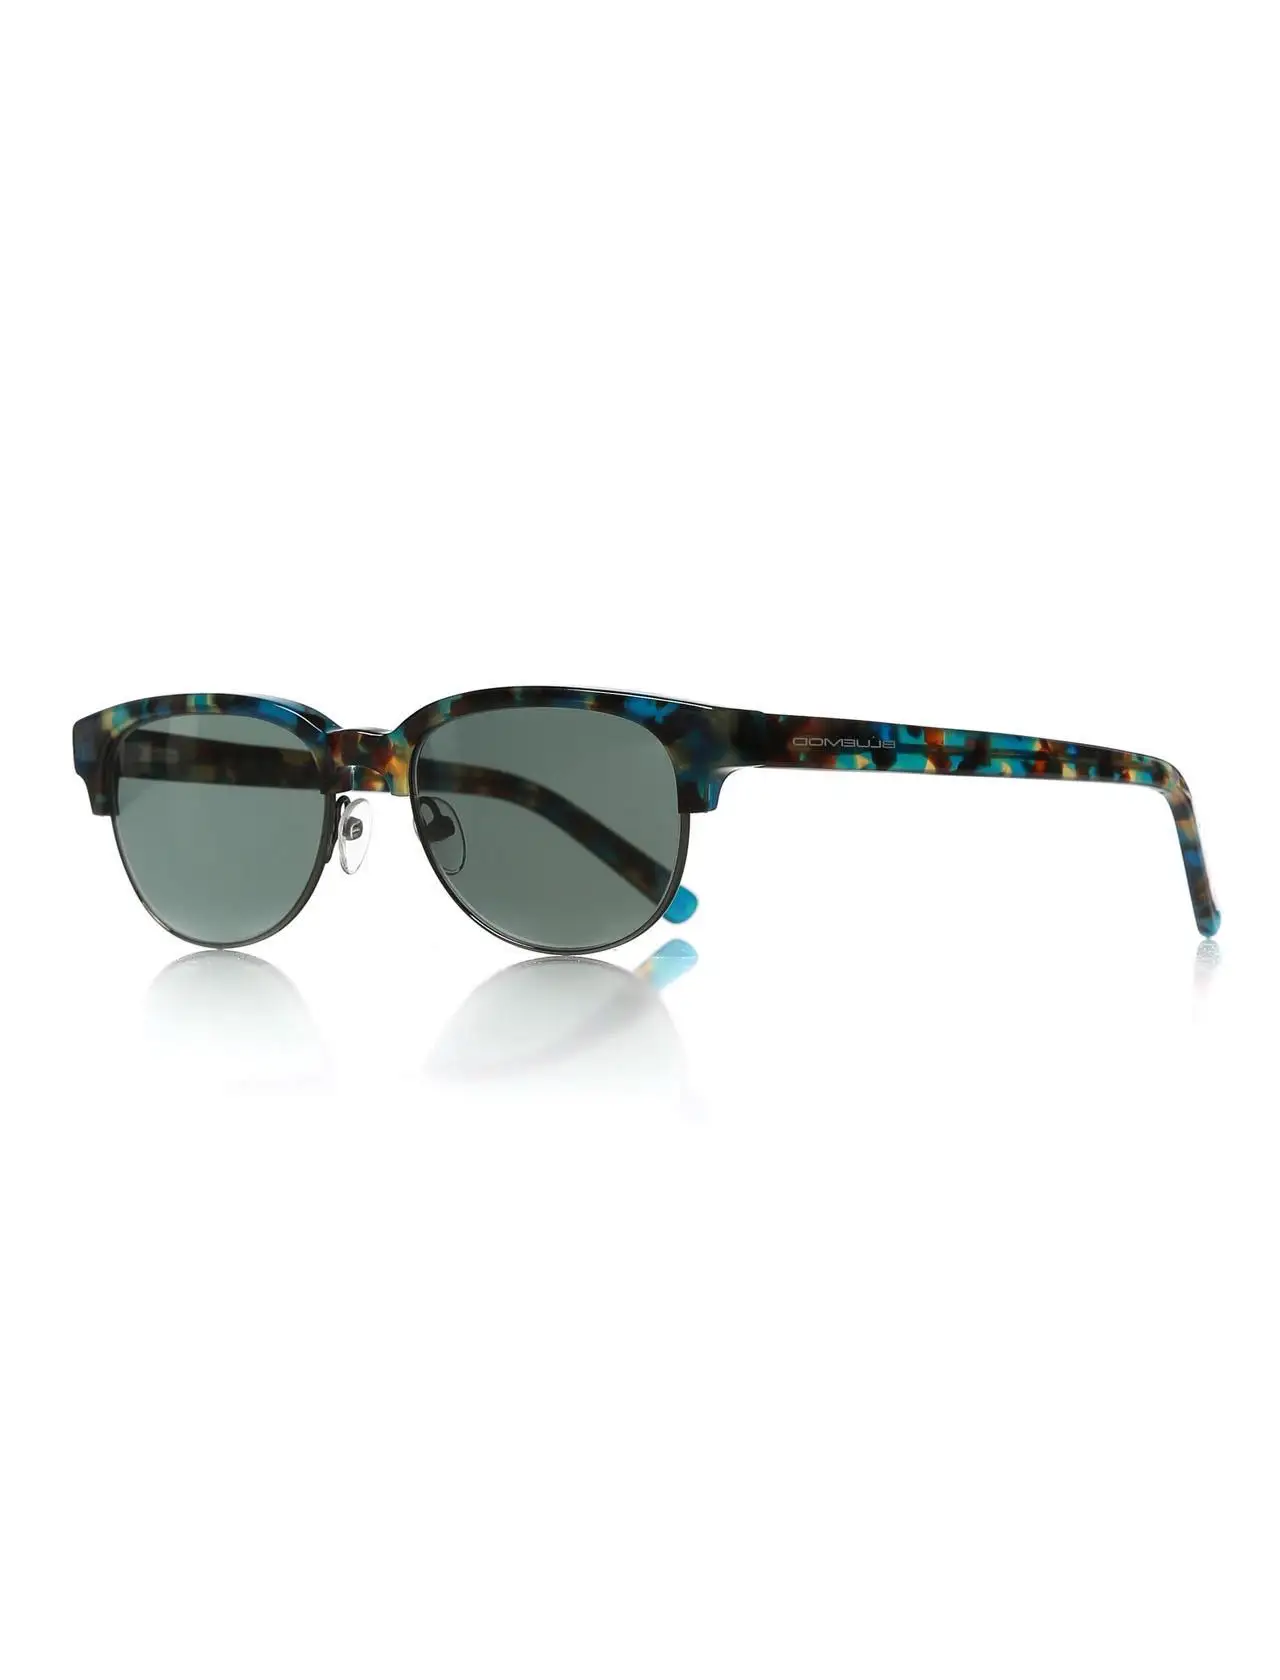 

Women's sunglasses blu bms24 04 51 clubmaster color organic oval aval 51-18-135 tiny